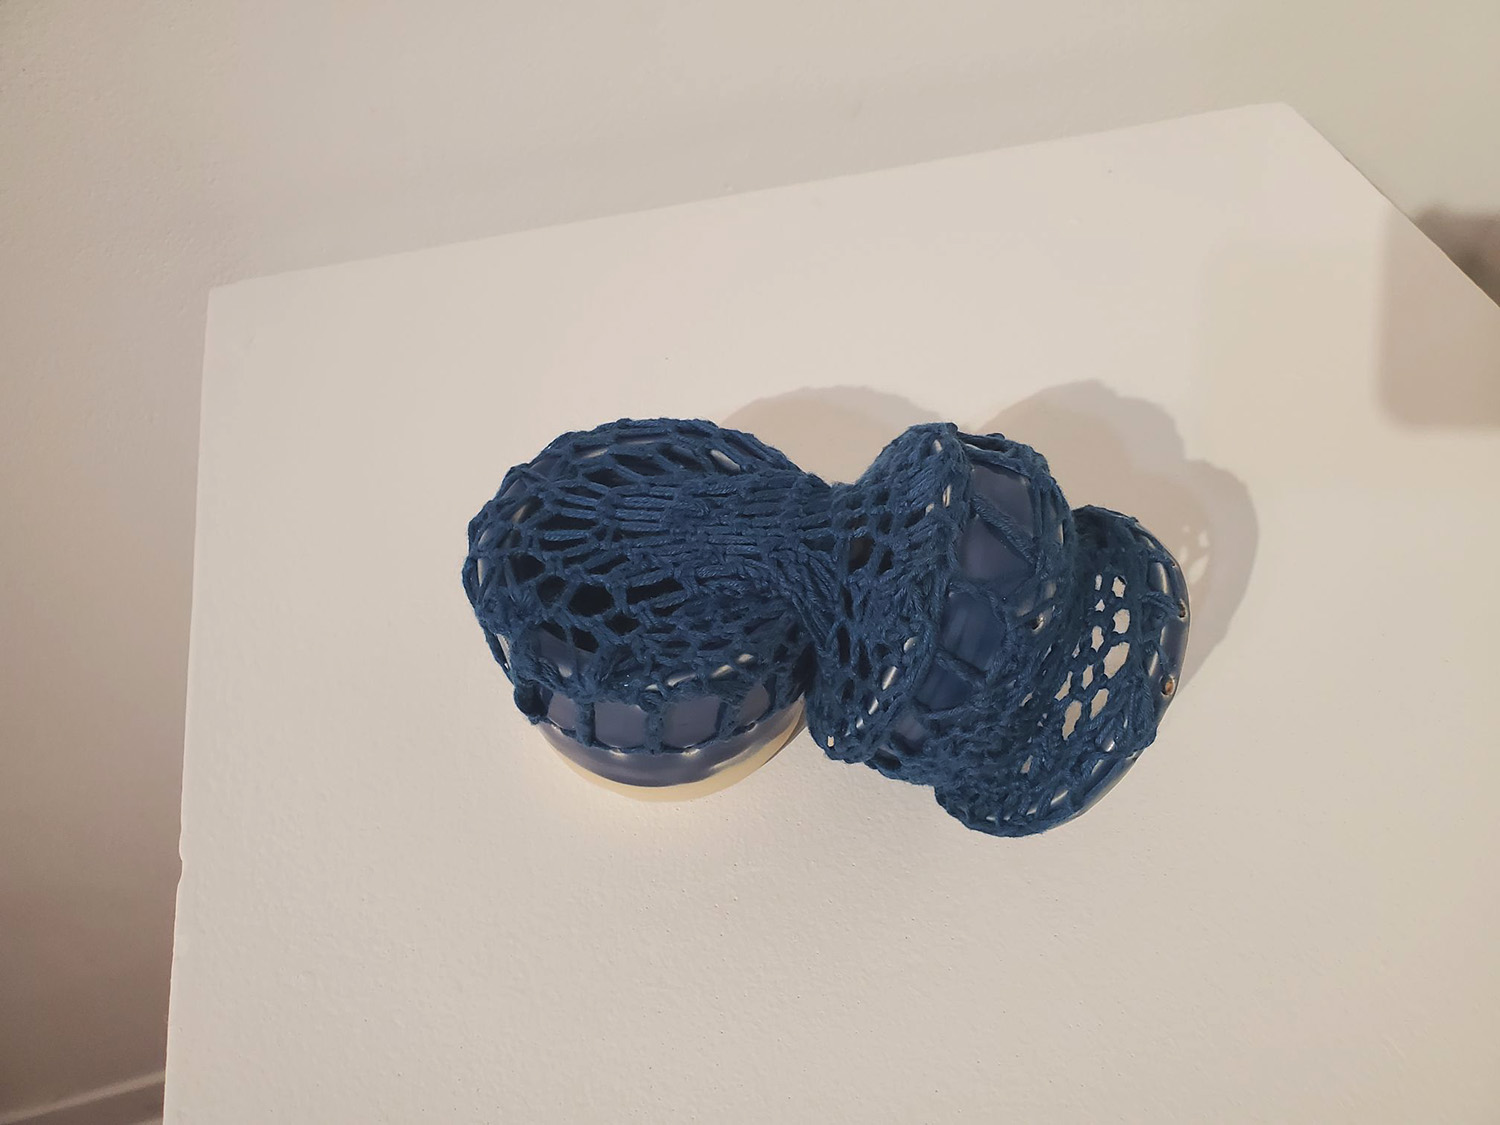 A blue cylinder broken and pieced together by blue yarn.